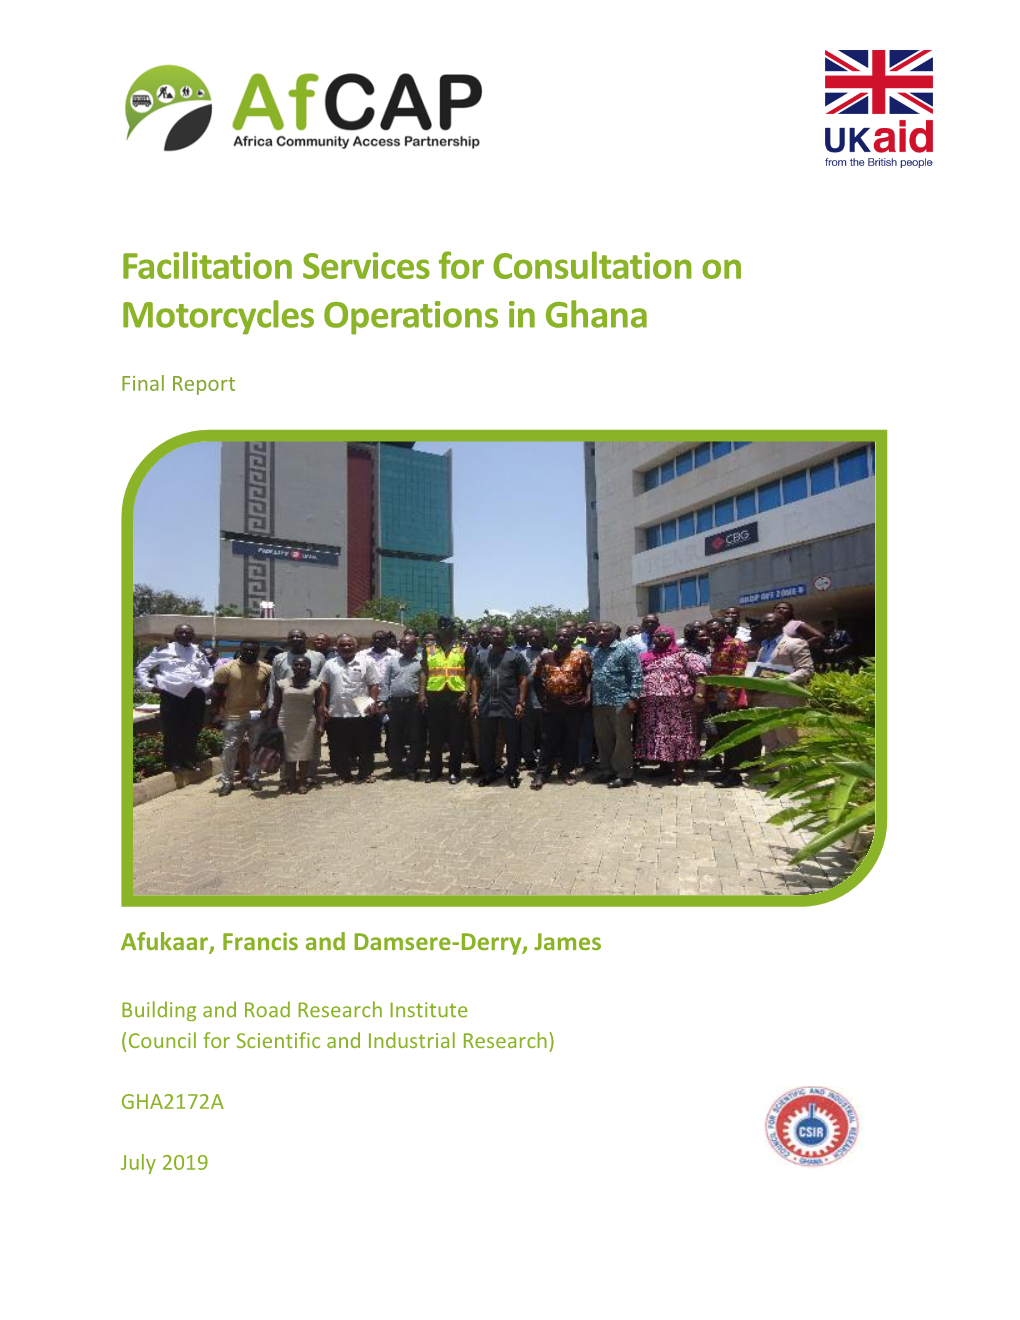 Facilitation Services for Consultation on Motorcycles Operations in Ghana